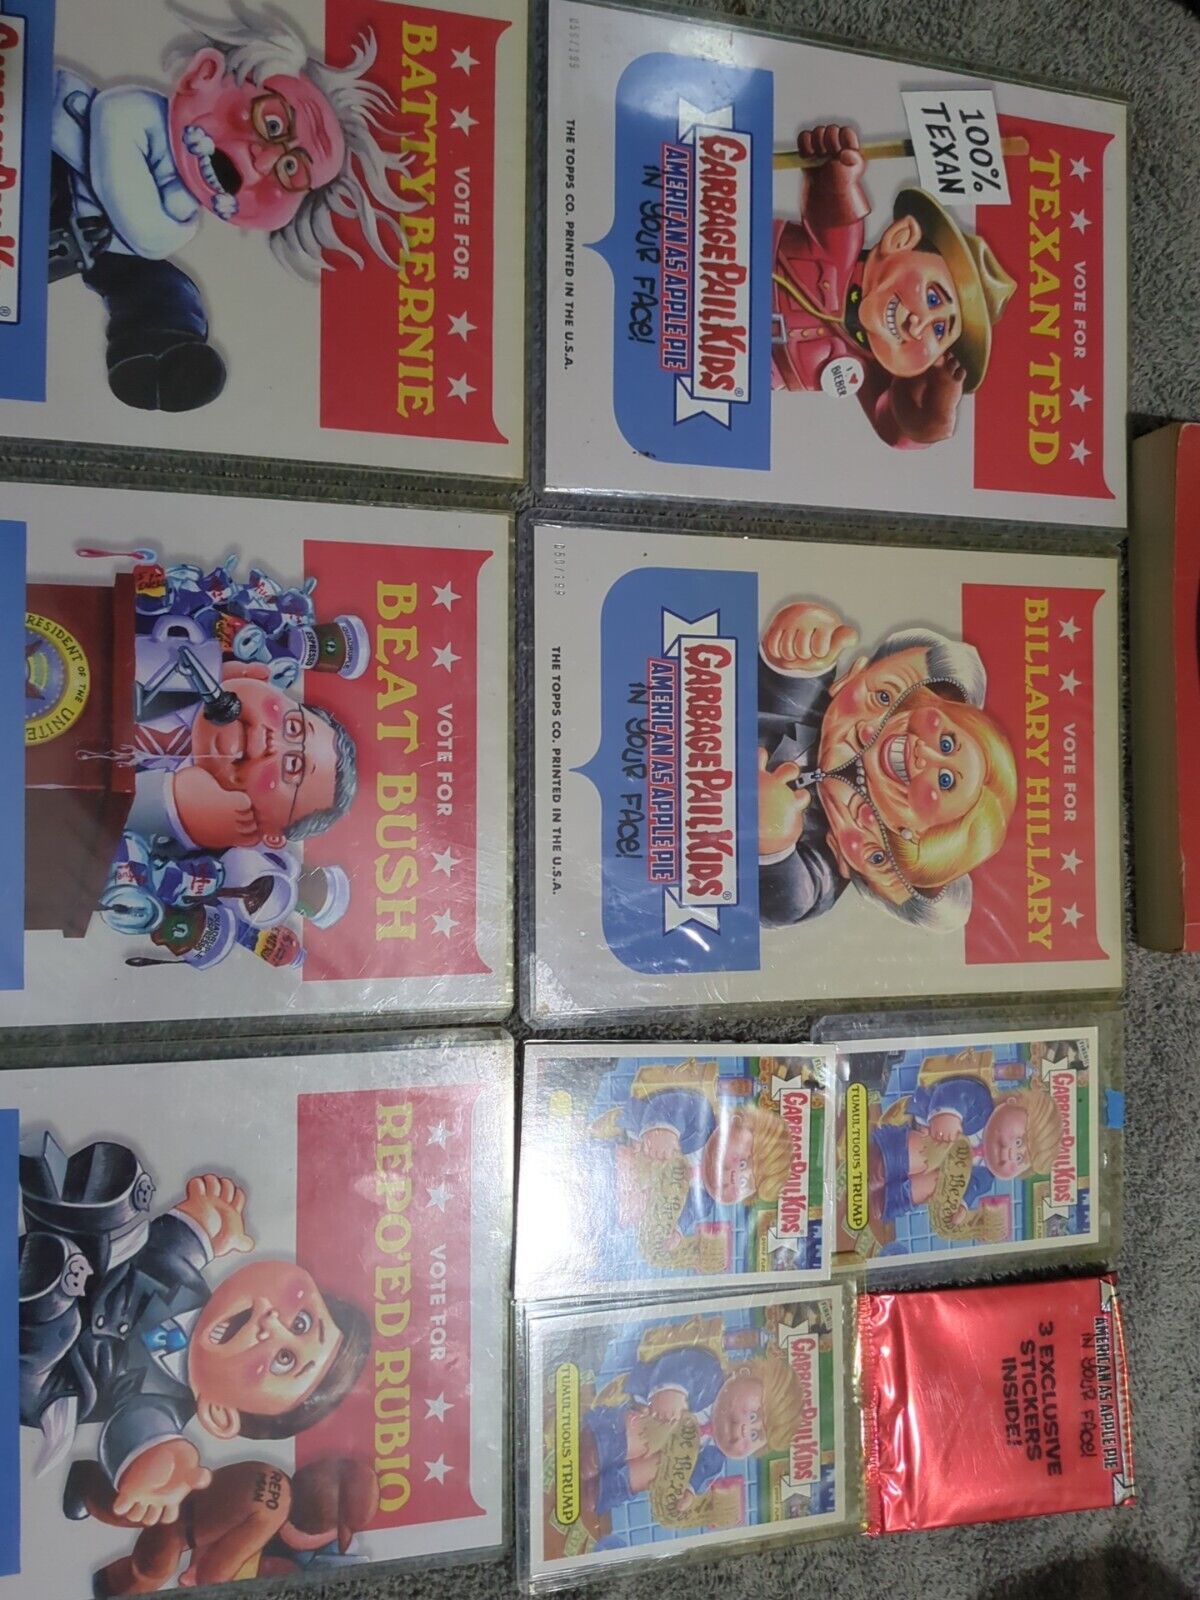 2016 Topps Garbage Pail Kids -American AAP-Card Lot NR Mint Condition Rare Find